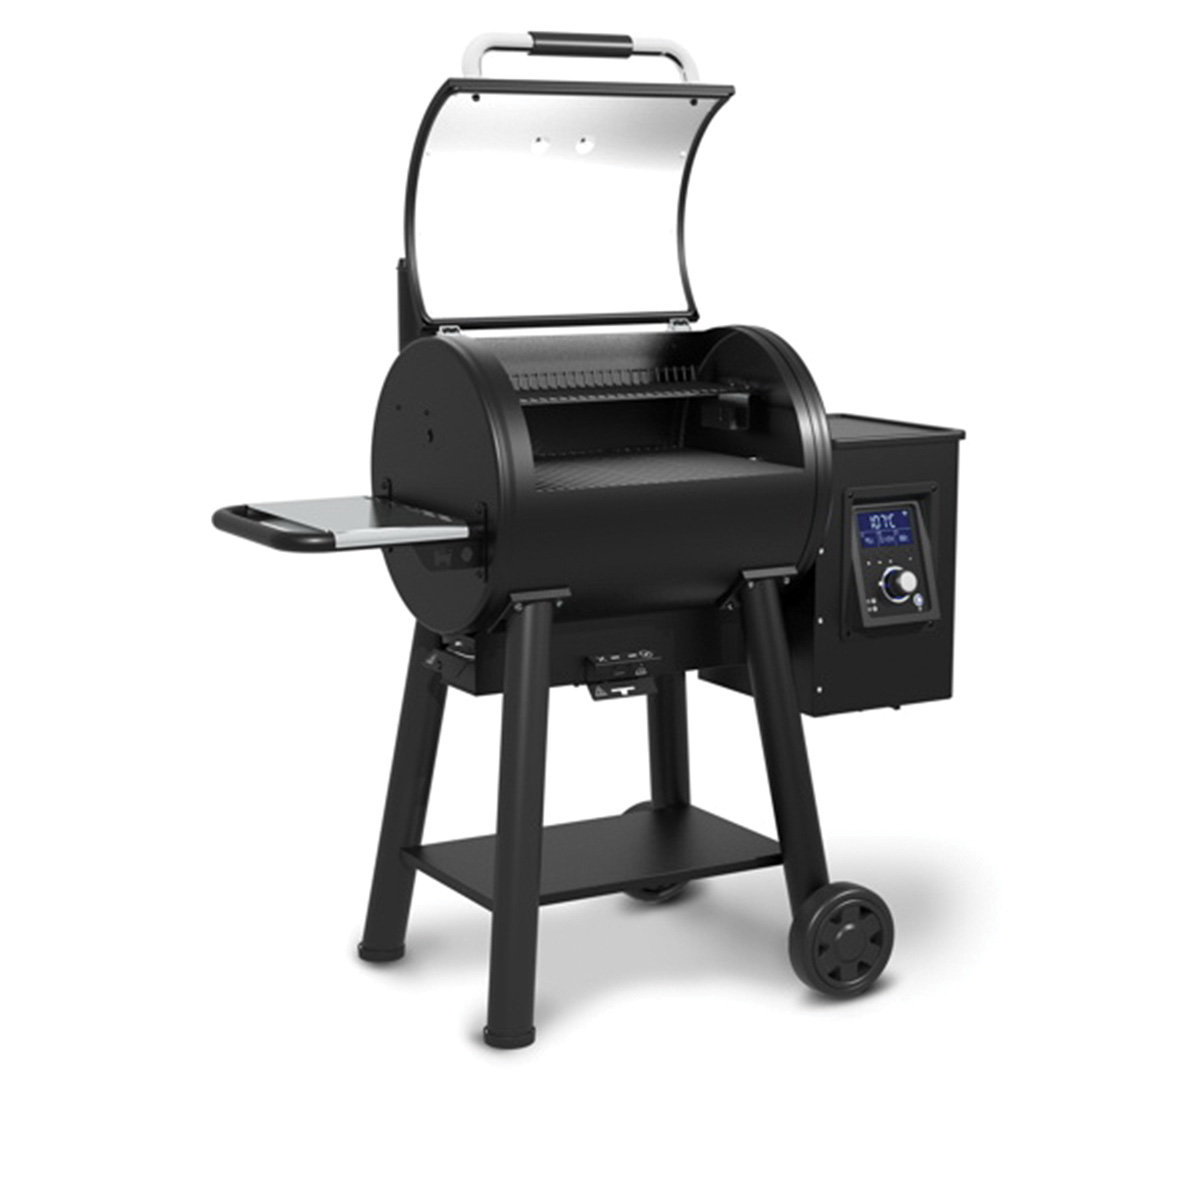 Broil King Regal Pellet 400 Series 495051 Pellet Grill, 500 sq-in Primary Cooking Surface, Smoker Included: Yes, Black - 3